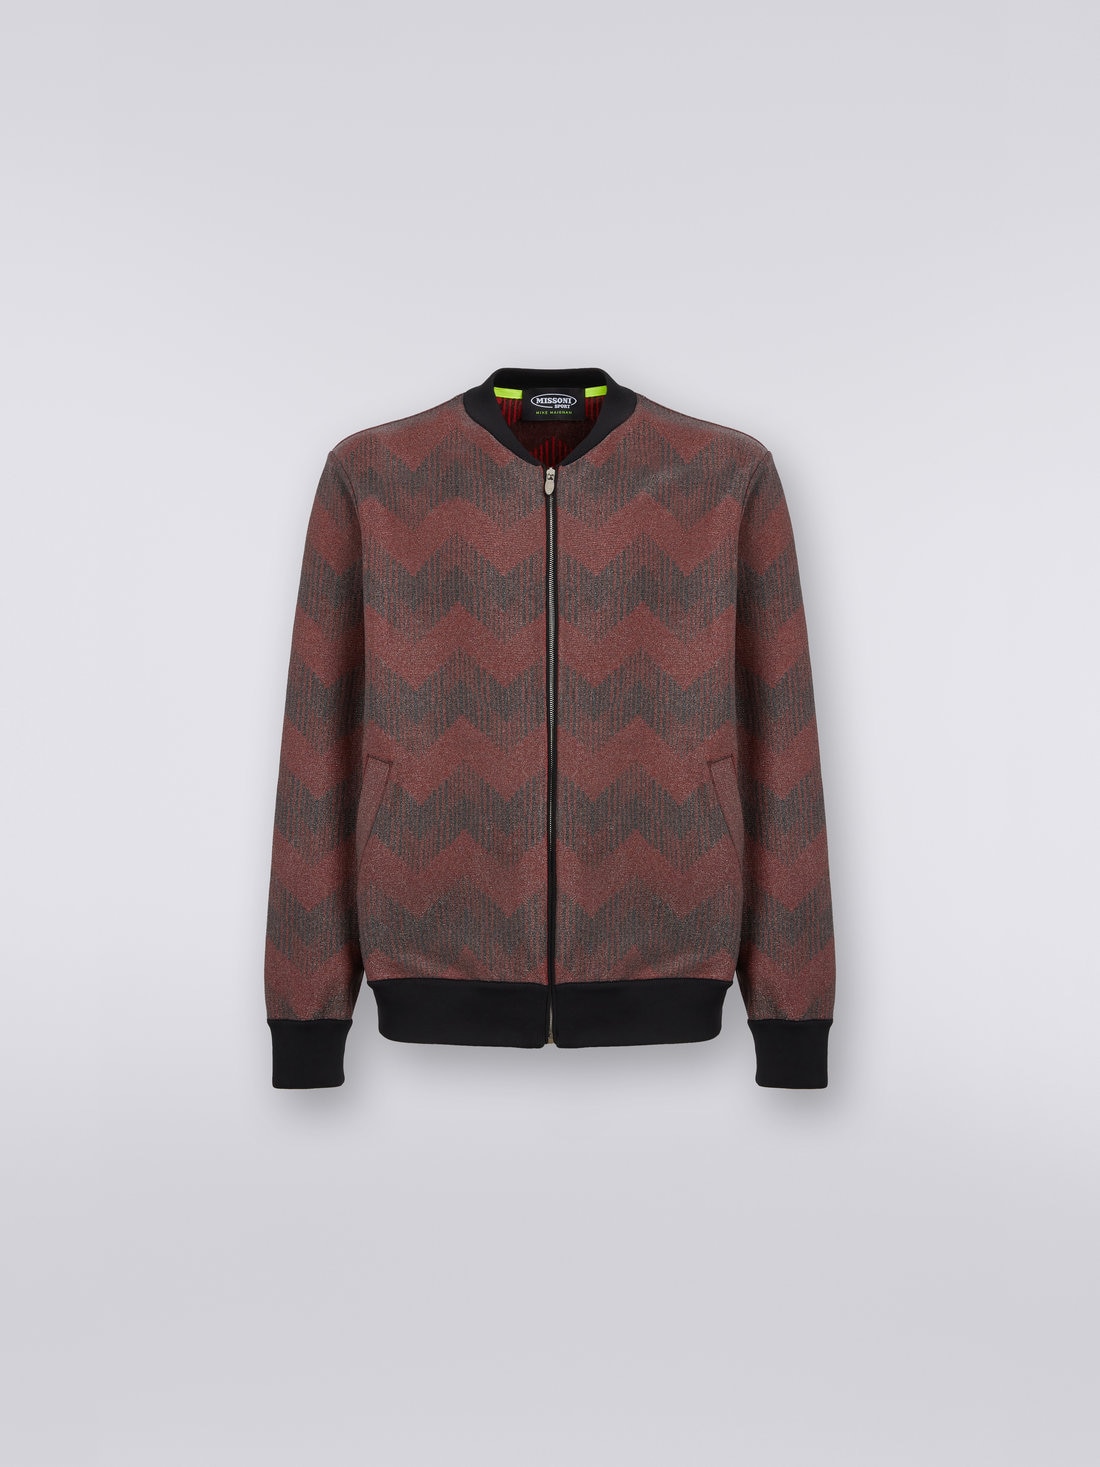 Cotton blend zigzag bomber jacket in collaboration with Mike Maignan, Black & Red - 0